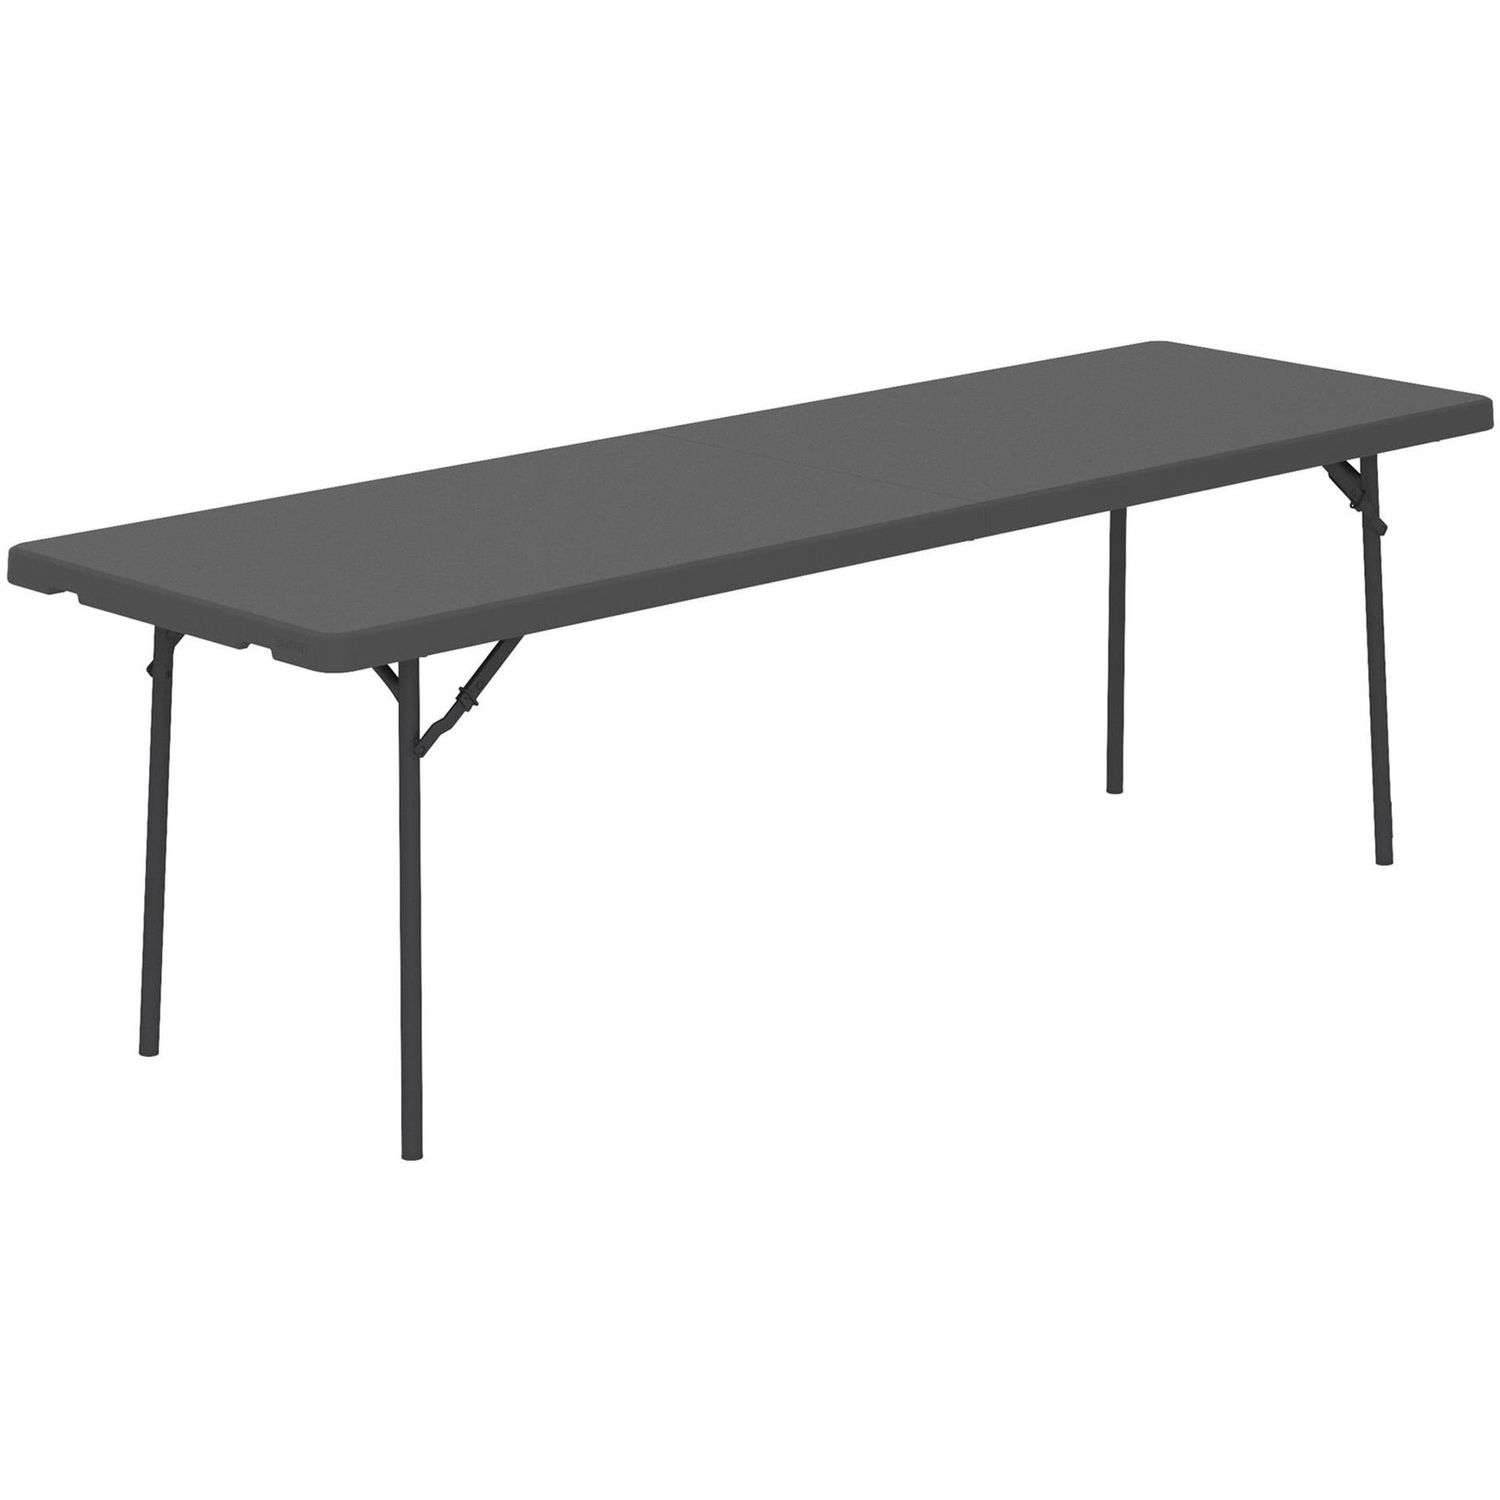 ZOWN 96" Commercial Blow Mold Folding Table 4 Legs, 96" Table Top Width x 30" Table Top Depth, 29.30" Height, Gray, High-density Polyethylene (HDPE), Resin